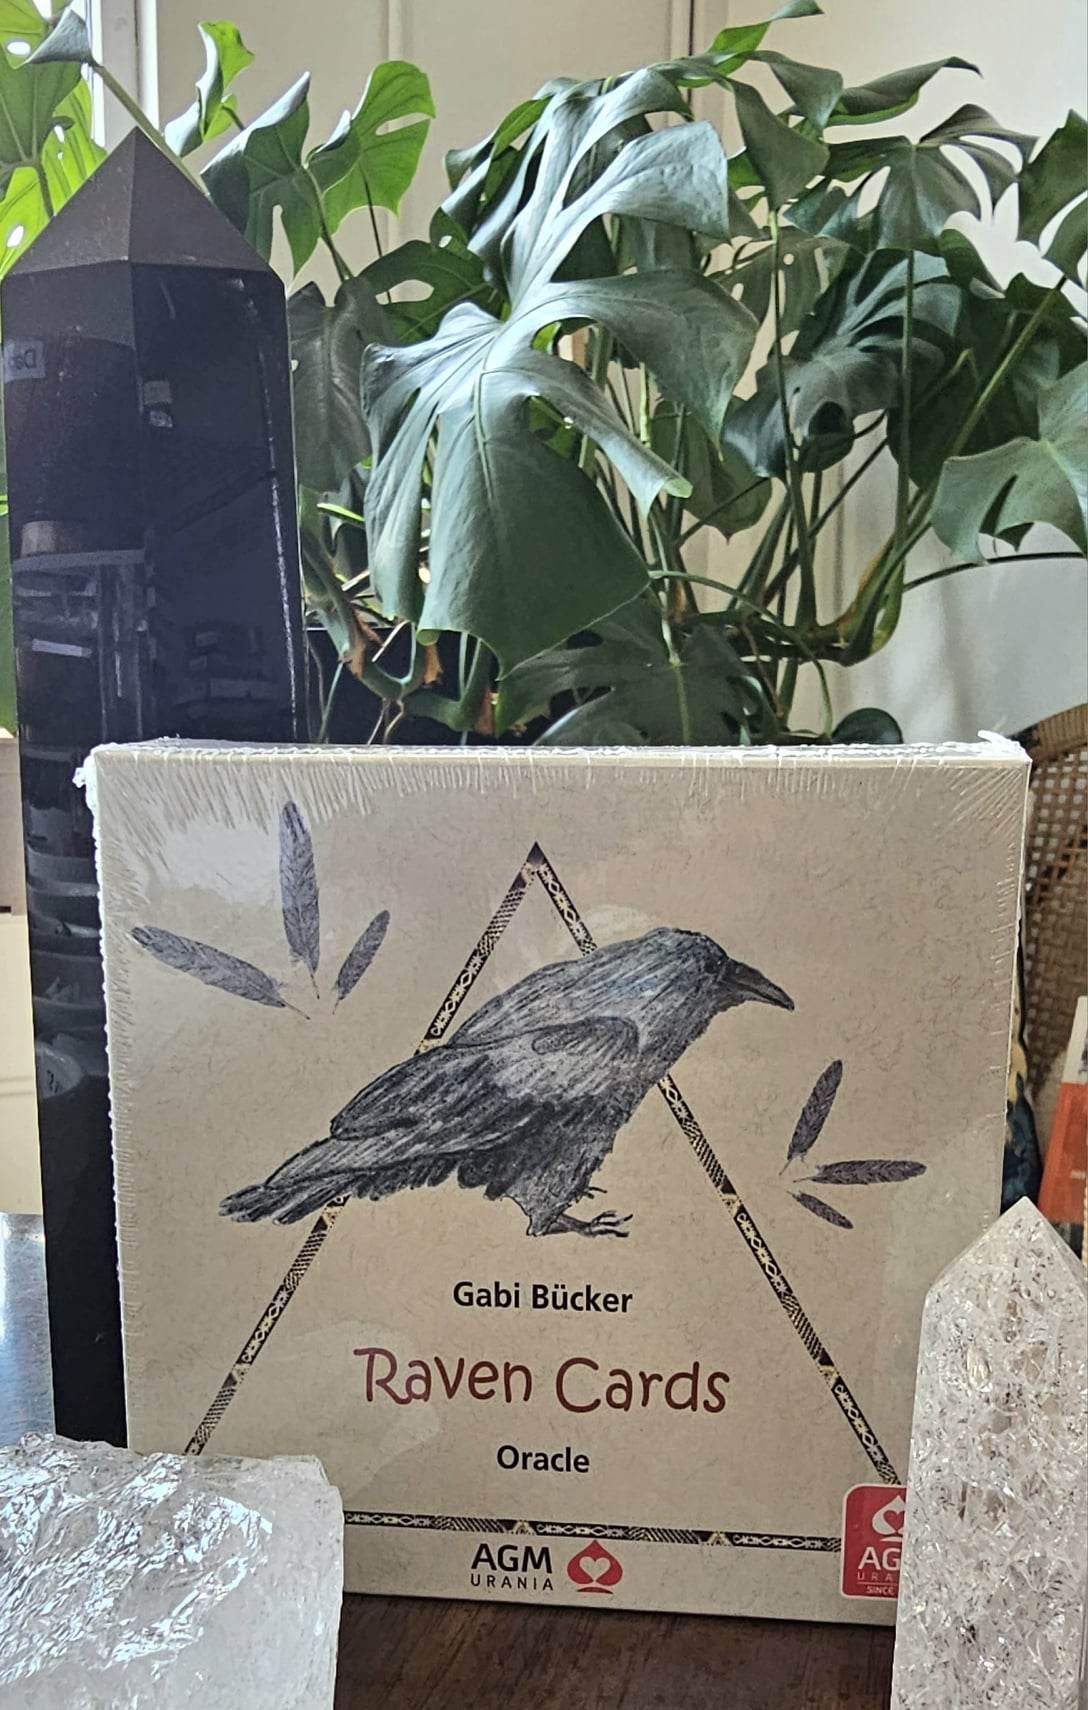 Raven Oracle Cards Deck